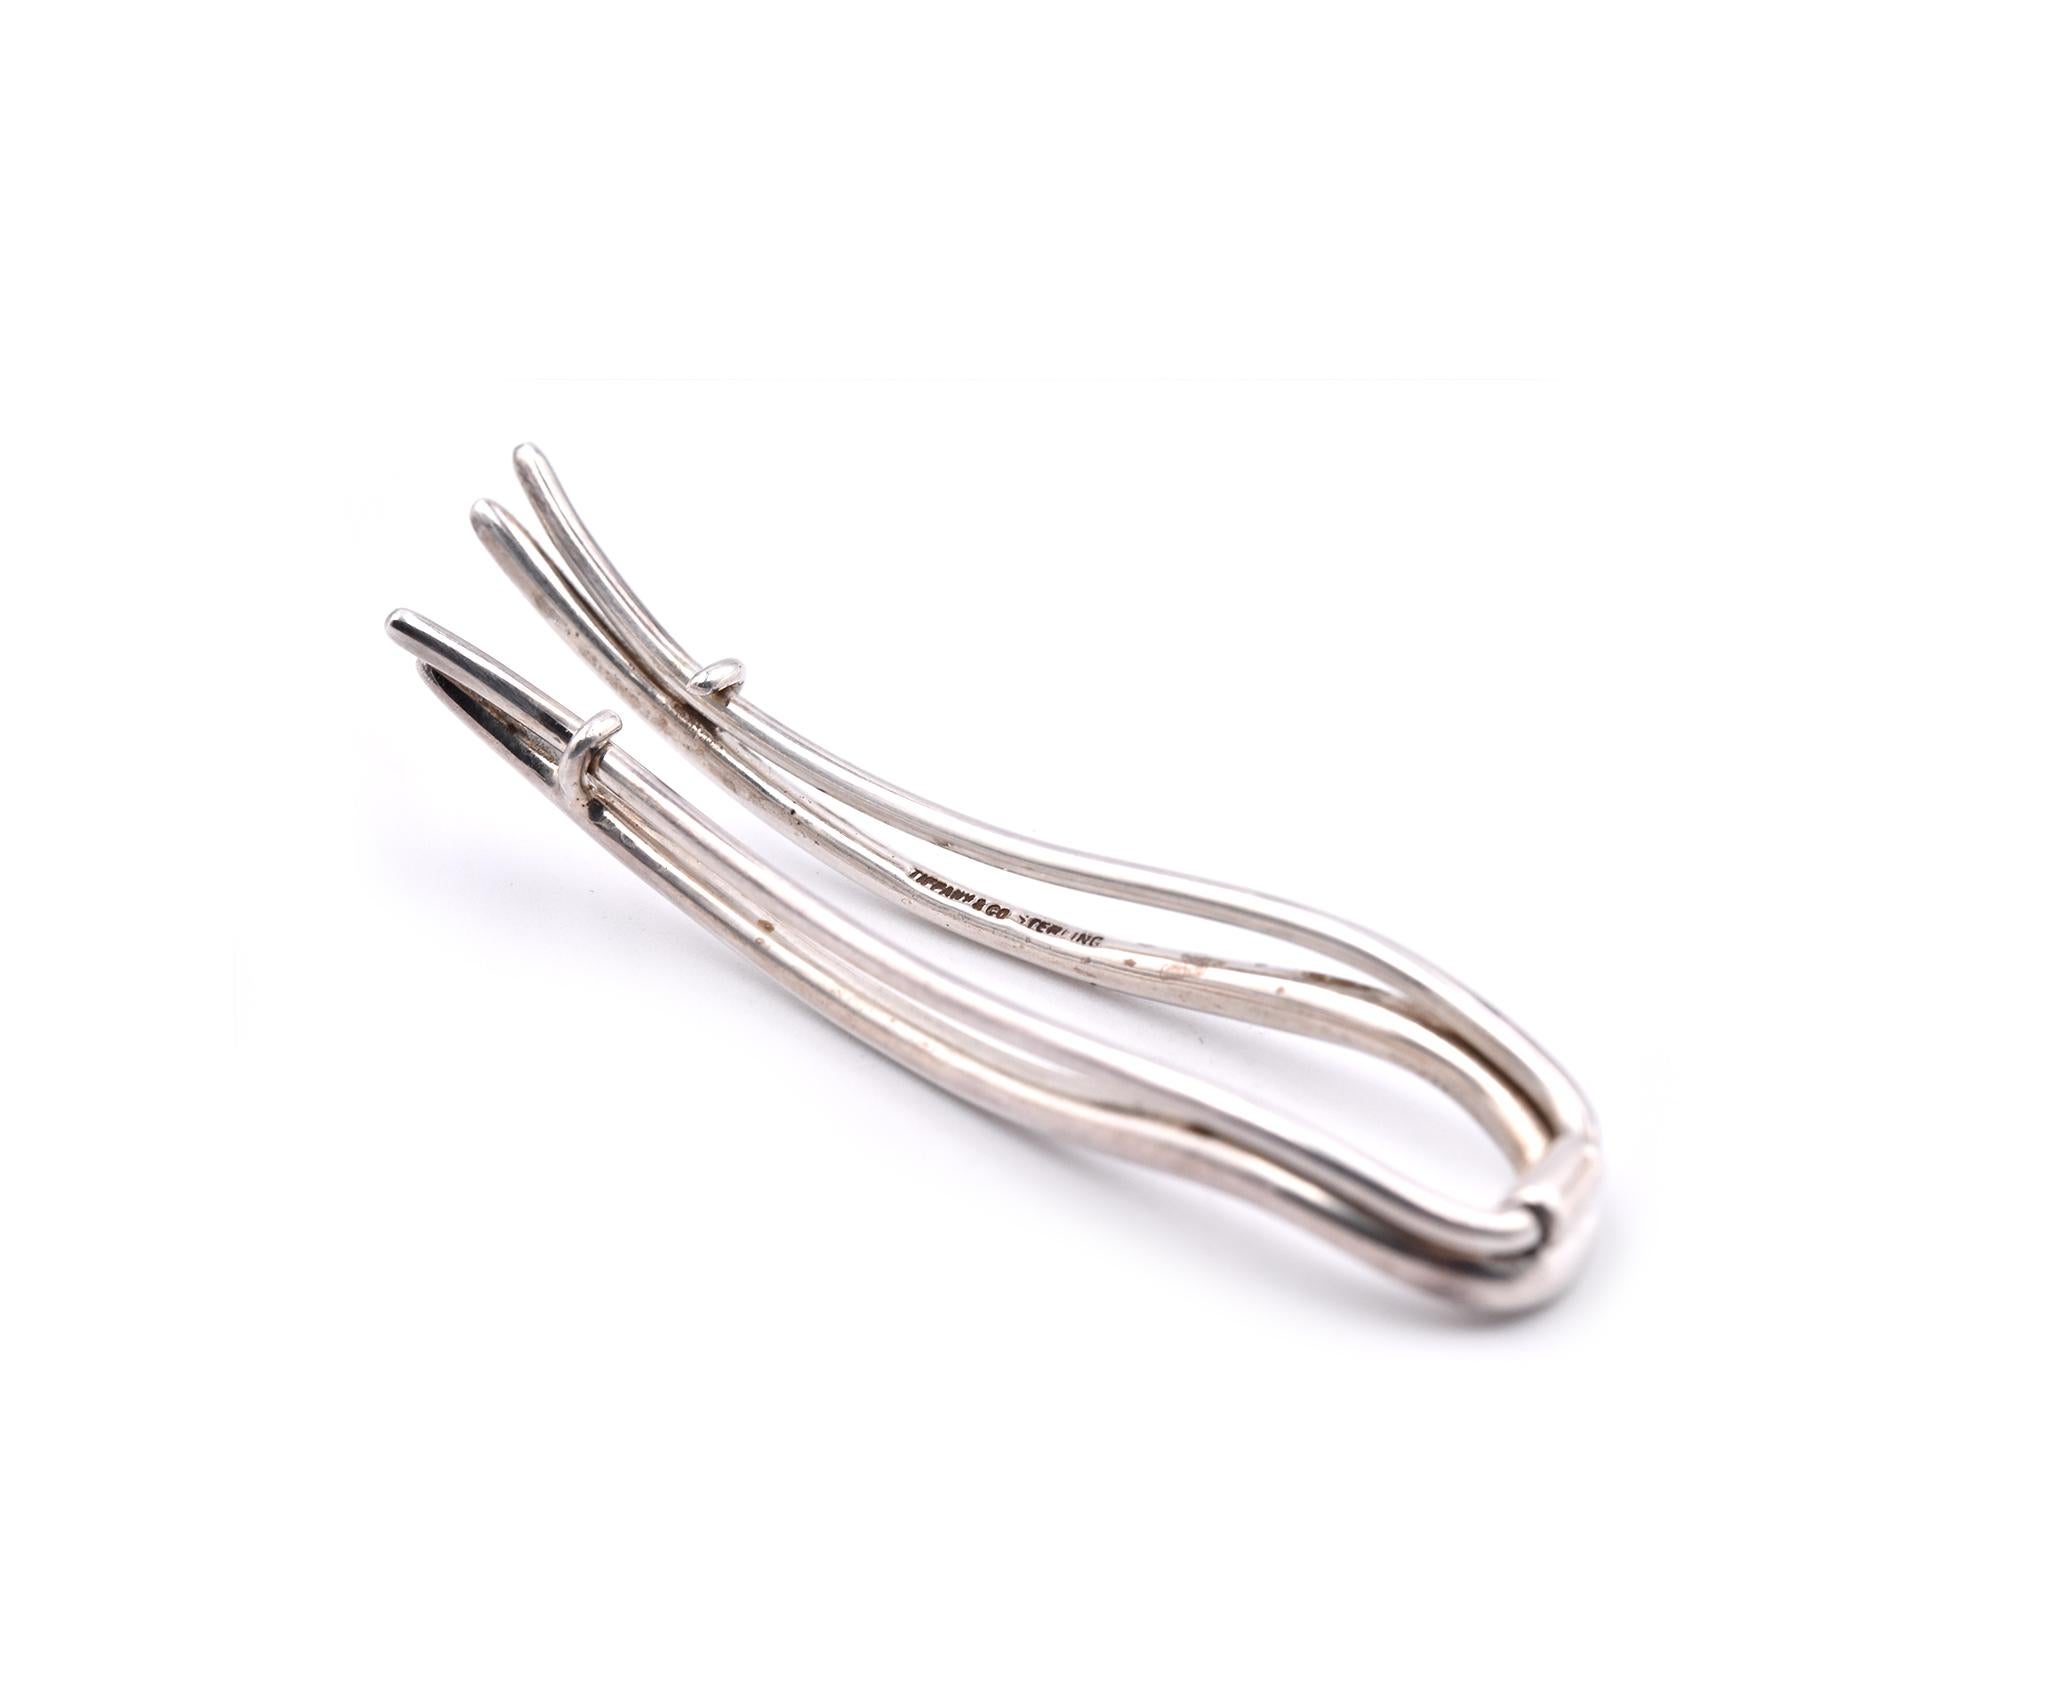 Designer: Tiffany & Co
Material: sterling silver
Weight: 7.70 grams
